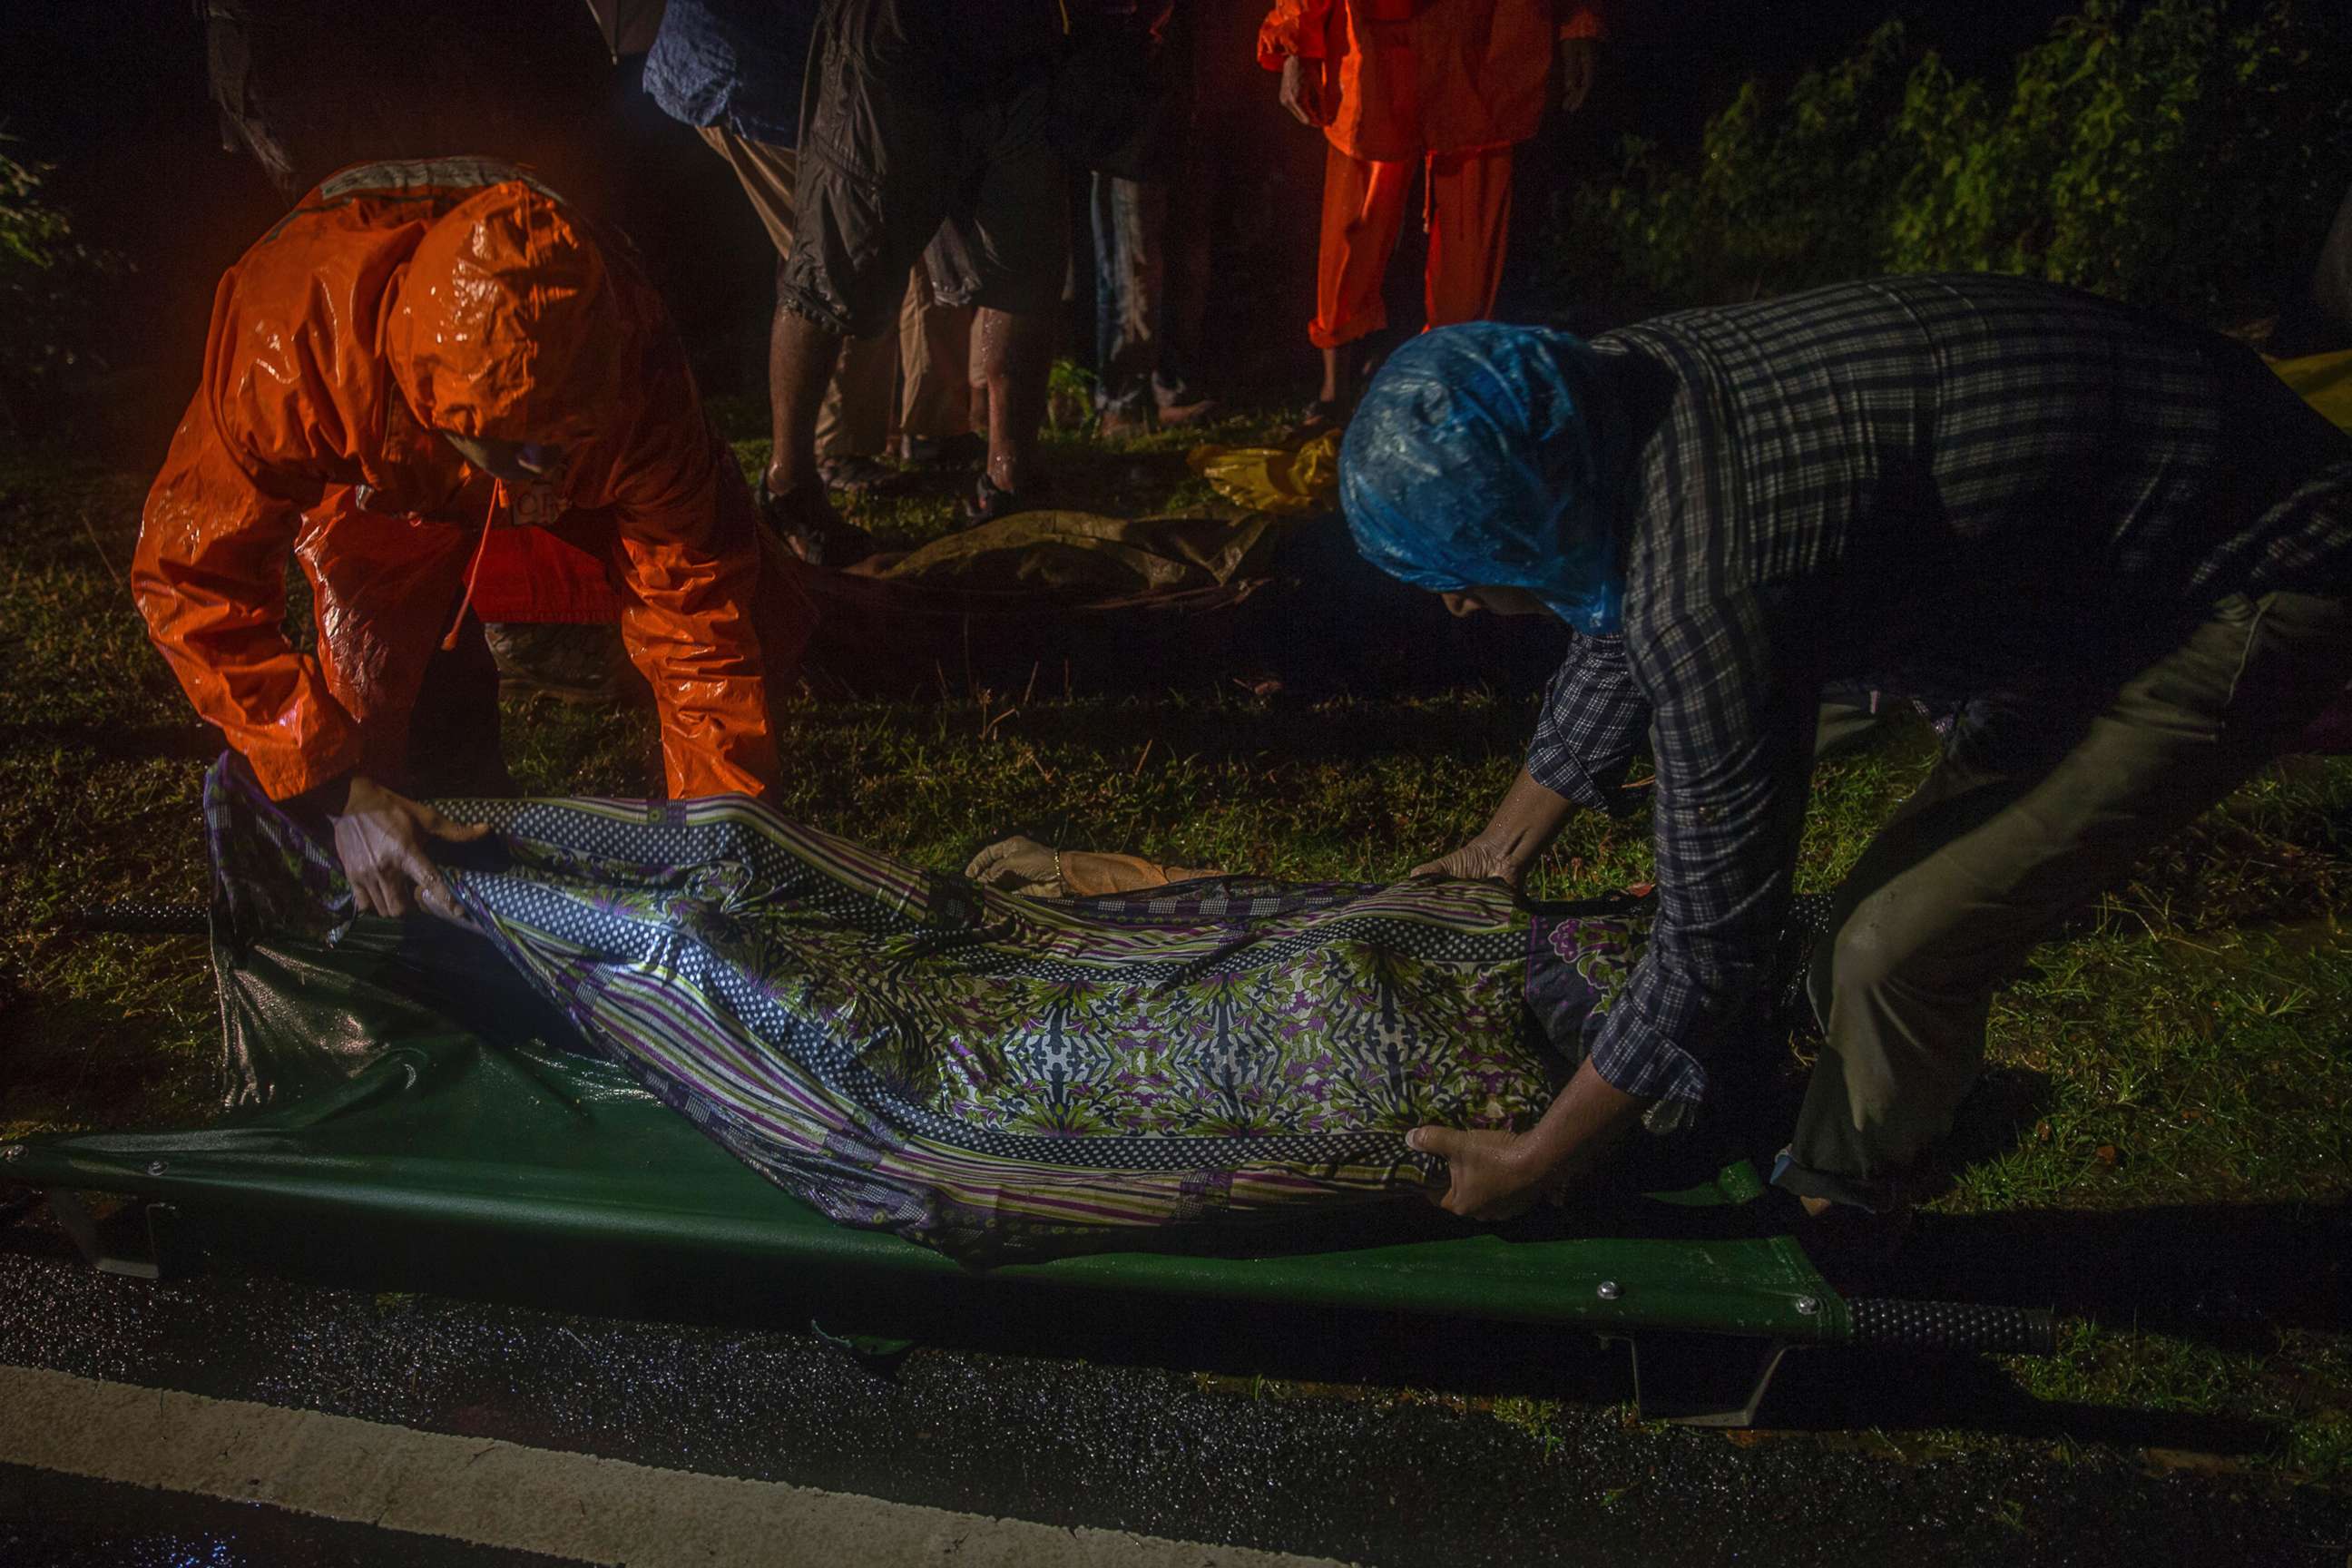 PHOTO: Rescue workers carry body of a Rohingya Muslim, who died after their boat capsized in the Bay of Bengal as they were crossing over from Myanmar into Bangladesh, near Inani beach, in Cox's Bazar district, Bangladesh, Sept. 28, 2017. 